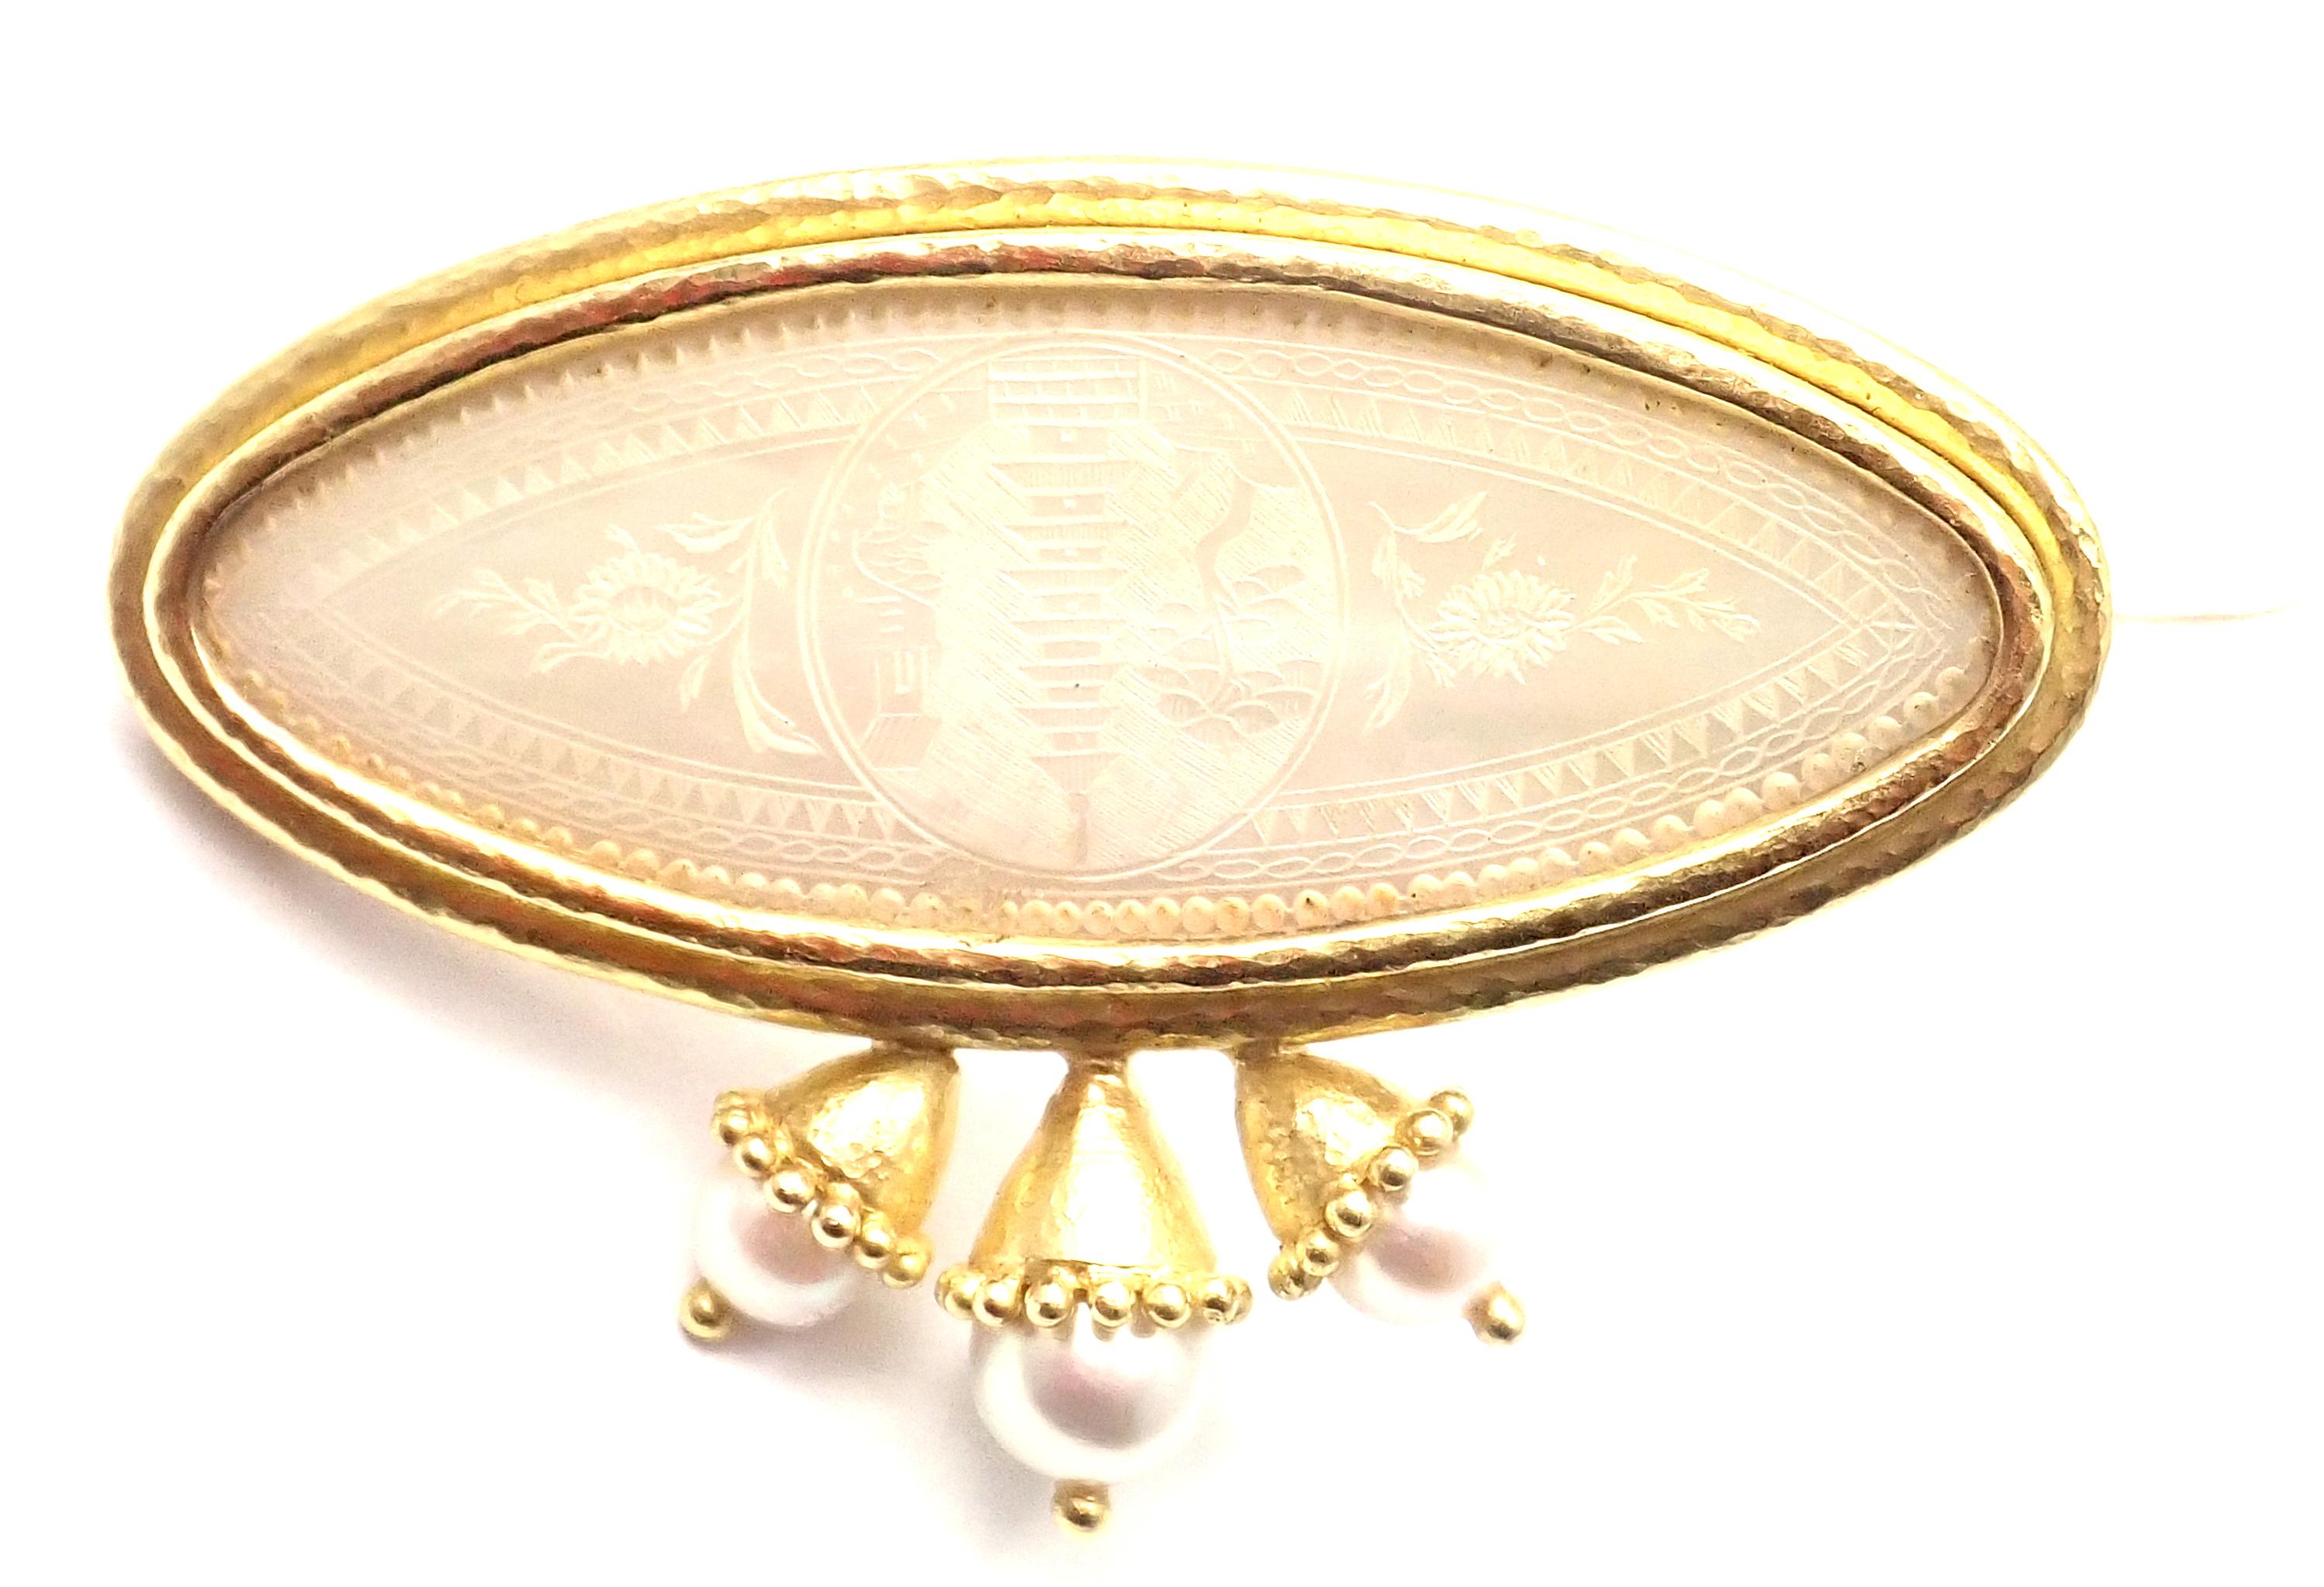 Hammered 18k Yellow Gold Mother of Pearl And Cultured Pearl Brooch Pin by Elizabeth Locke. 
With One Large oval shaped mother of pearl & 3 cultured pearls 8mm, 6.5mm, 6.5mm
Details: 
Weight: 32.3 grams
Measurements: 67mm x 46mm
Stamped Hallmarks: